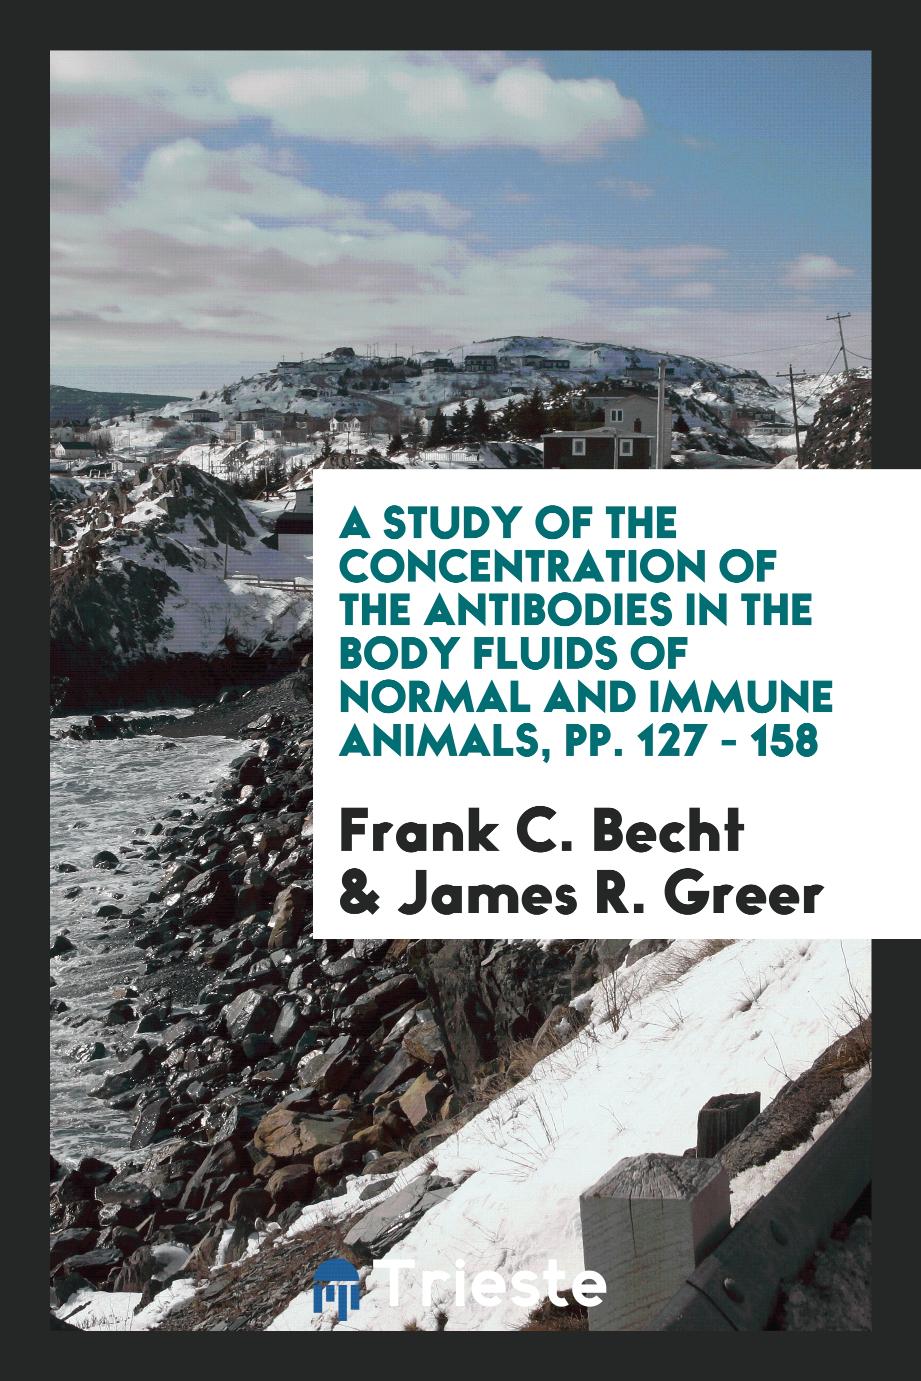 A study of the concentration of the antibodies in the body fluids of normal and immune animals, pp. 127 - 158